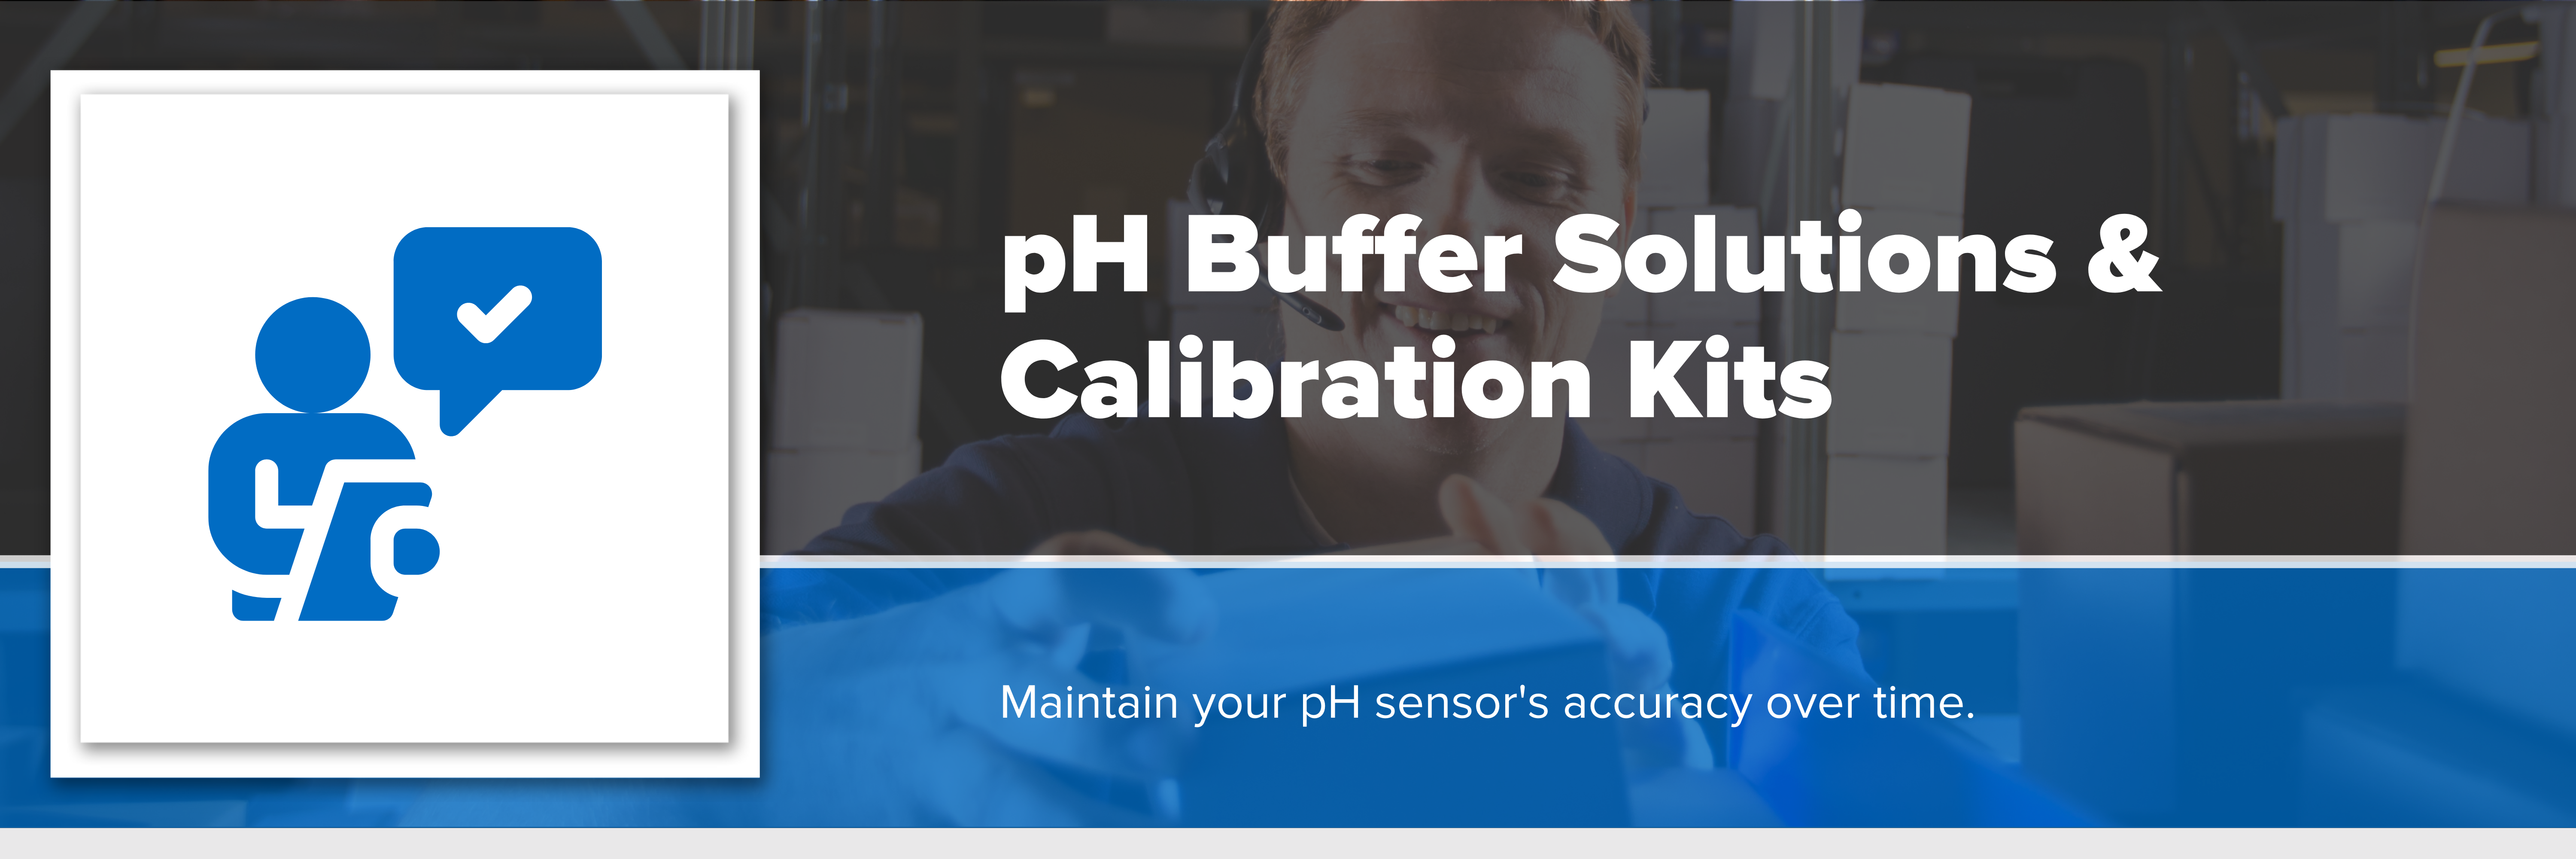 Header image with text "pH Buffer Solutions & Calibration Kits."